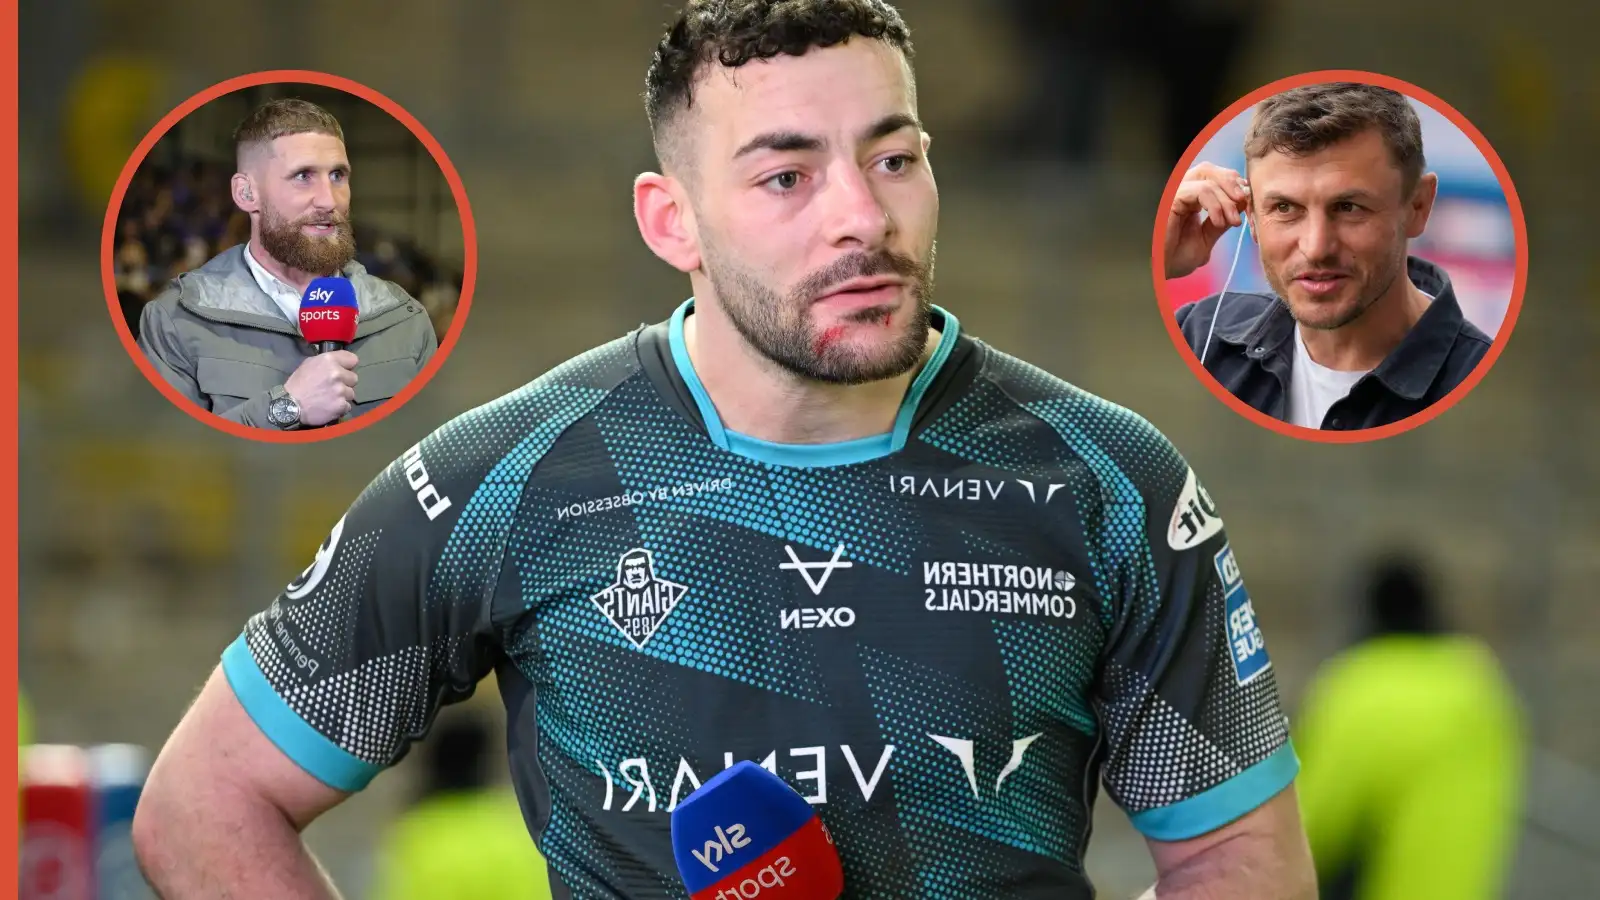 ‘Do your job!’: Sky Sports pundits lambast Jake Connor after pivotal moment in Huddersfield Giants defeat